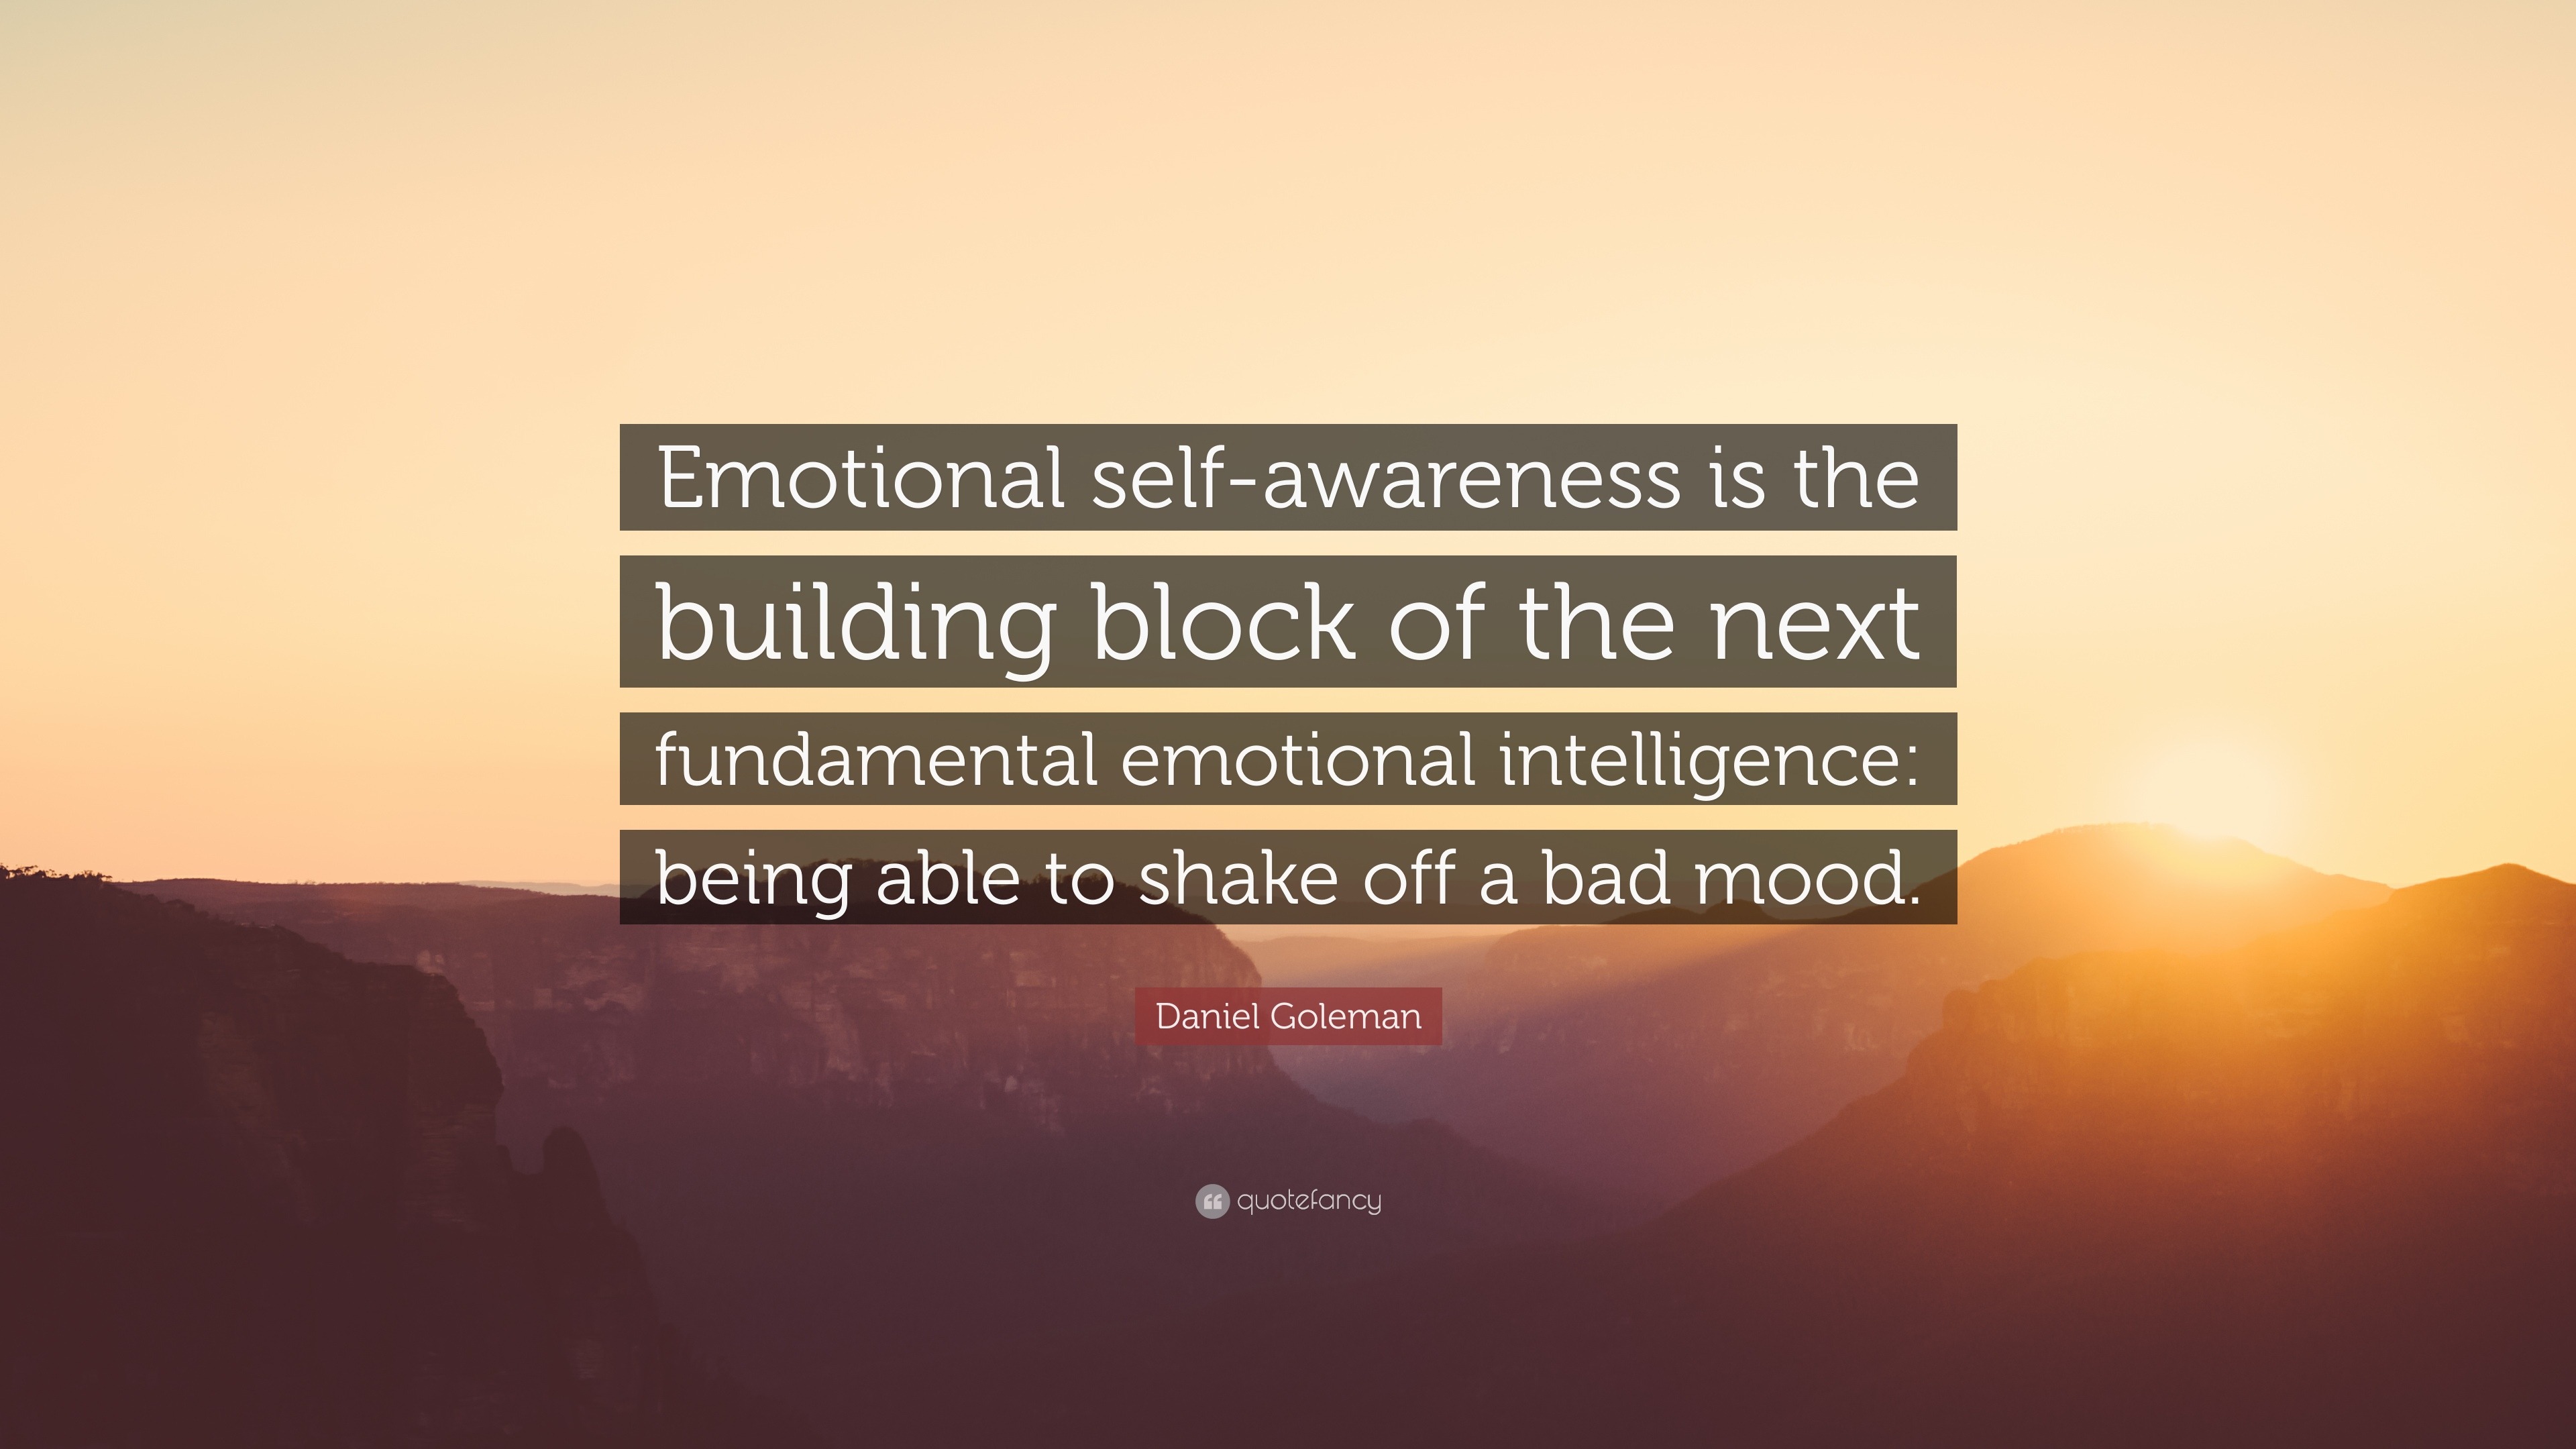 Daniel Goleman Quote Emotional Self Awareness Is The Building Block Of The Next Fundamental Emotional Intelligence Being Able To Shake Off A